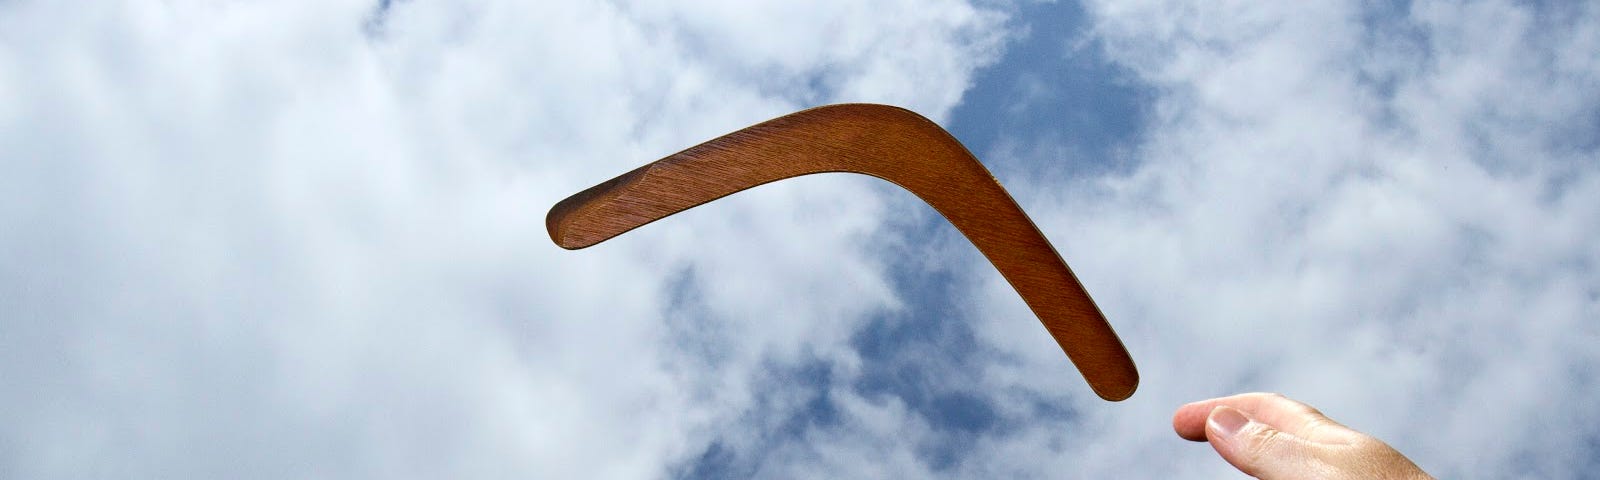 Photo of person tossing a boomerang through the air